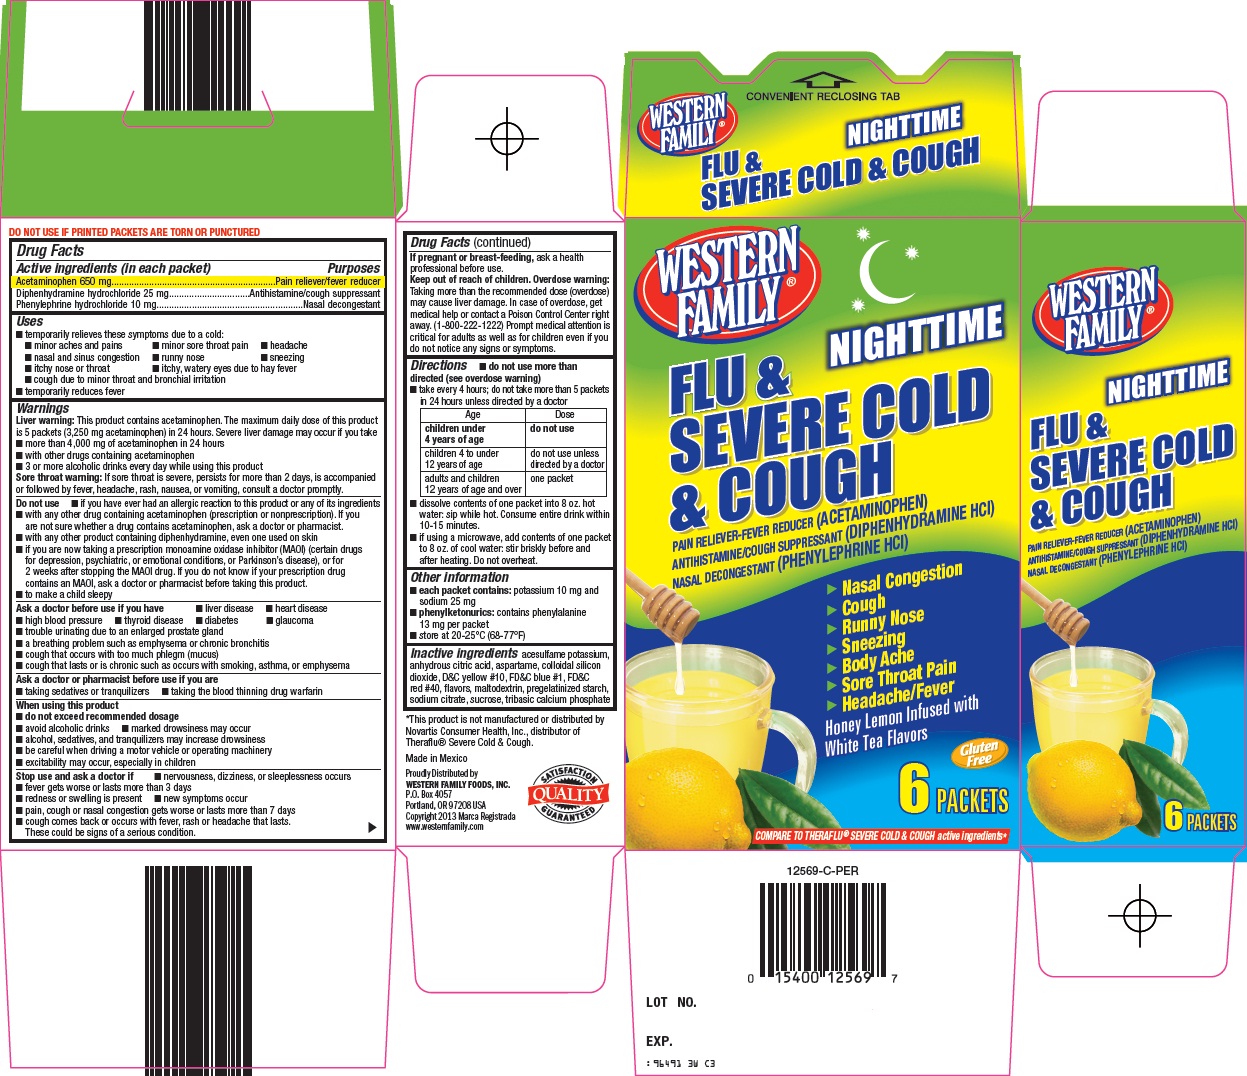 Western Family Flu & Severe Cold & Cough